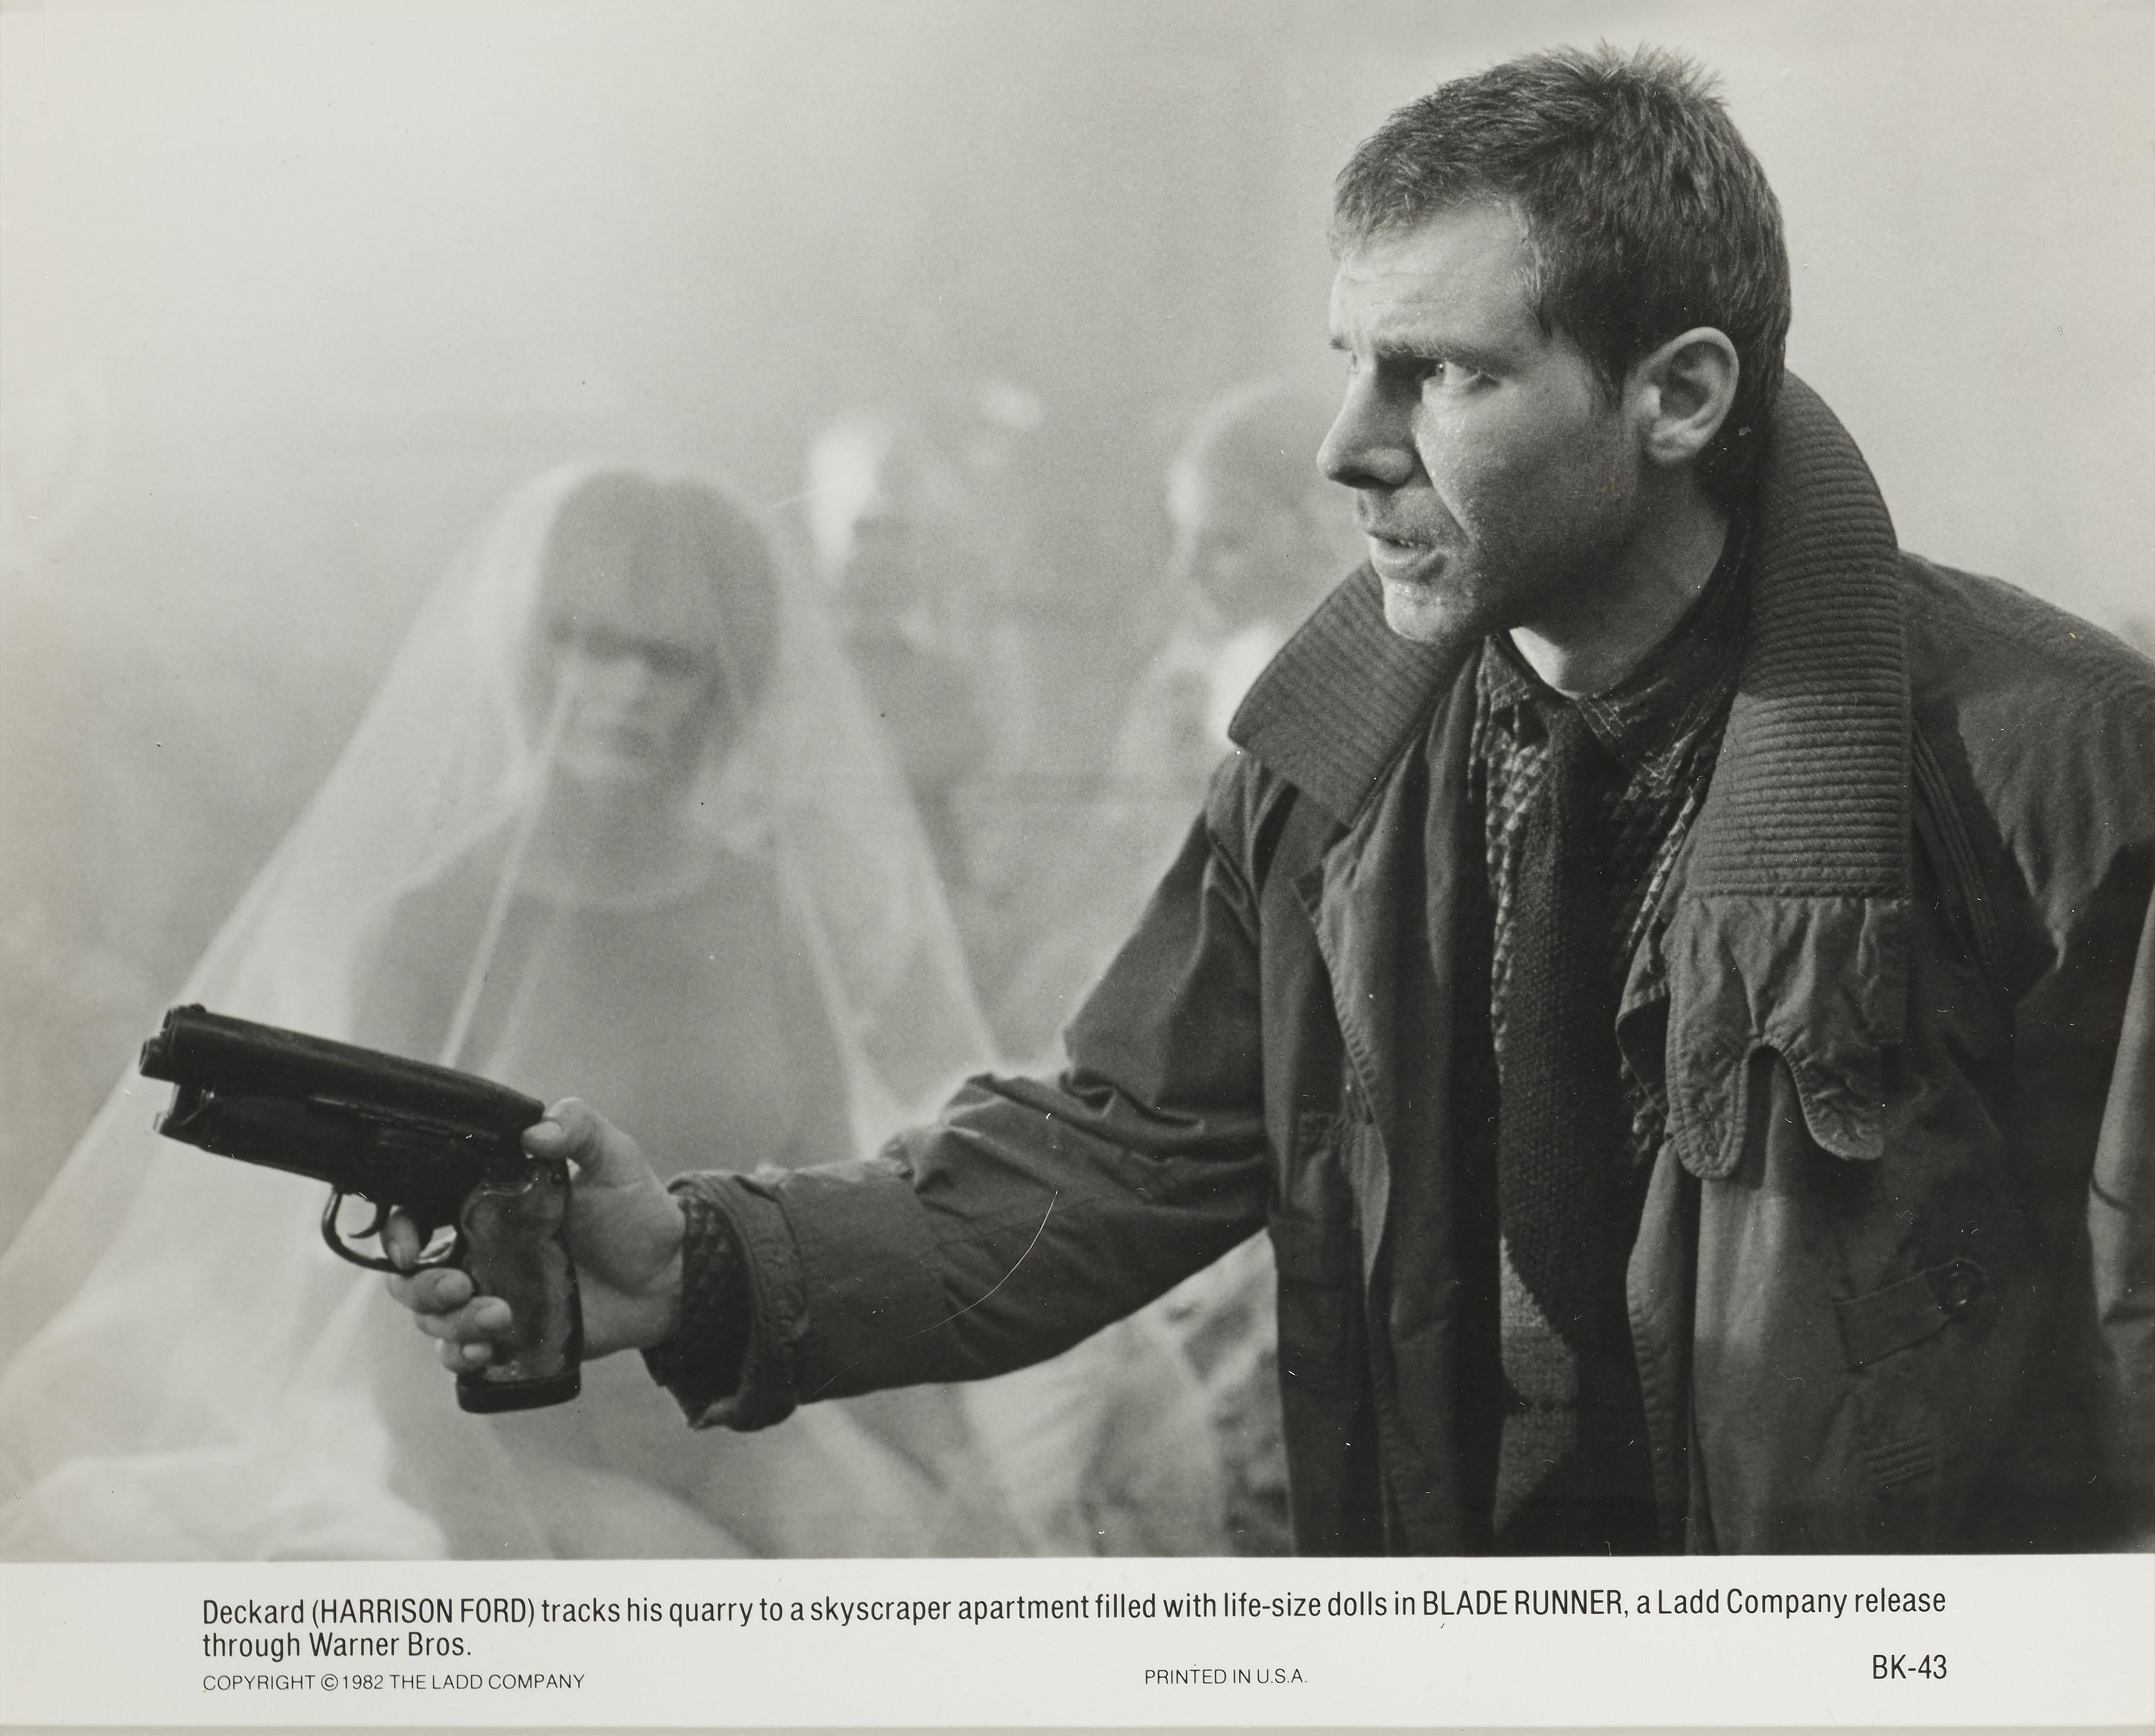 Original US production still for Ridley Scott's 1980s sci-fi film has become a true cult classic. Thirty-five years on a sequel (Blade Runner 2049) was made, also starring Harrison Ford. This piece is conservation framed with UV plexiglass in a